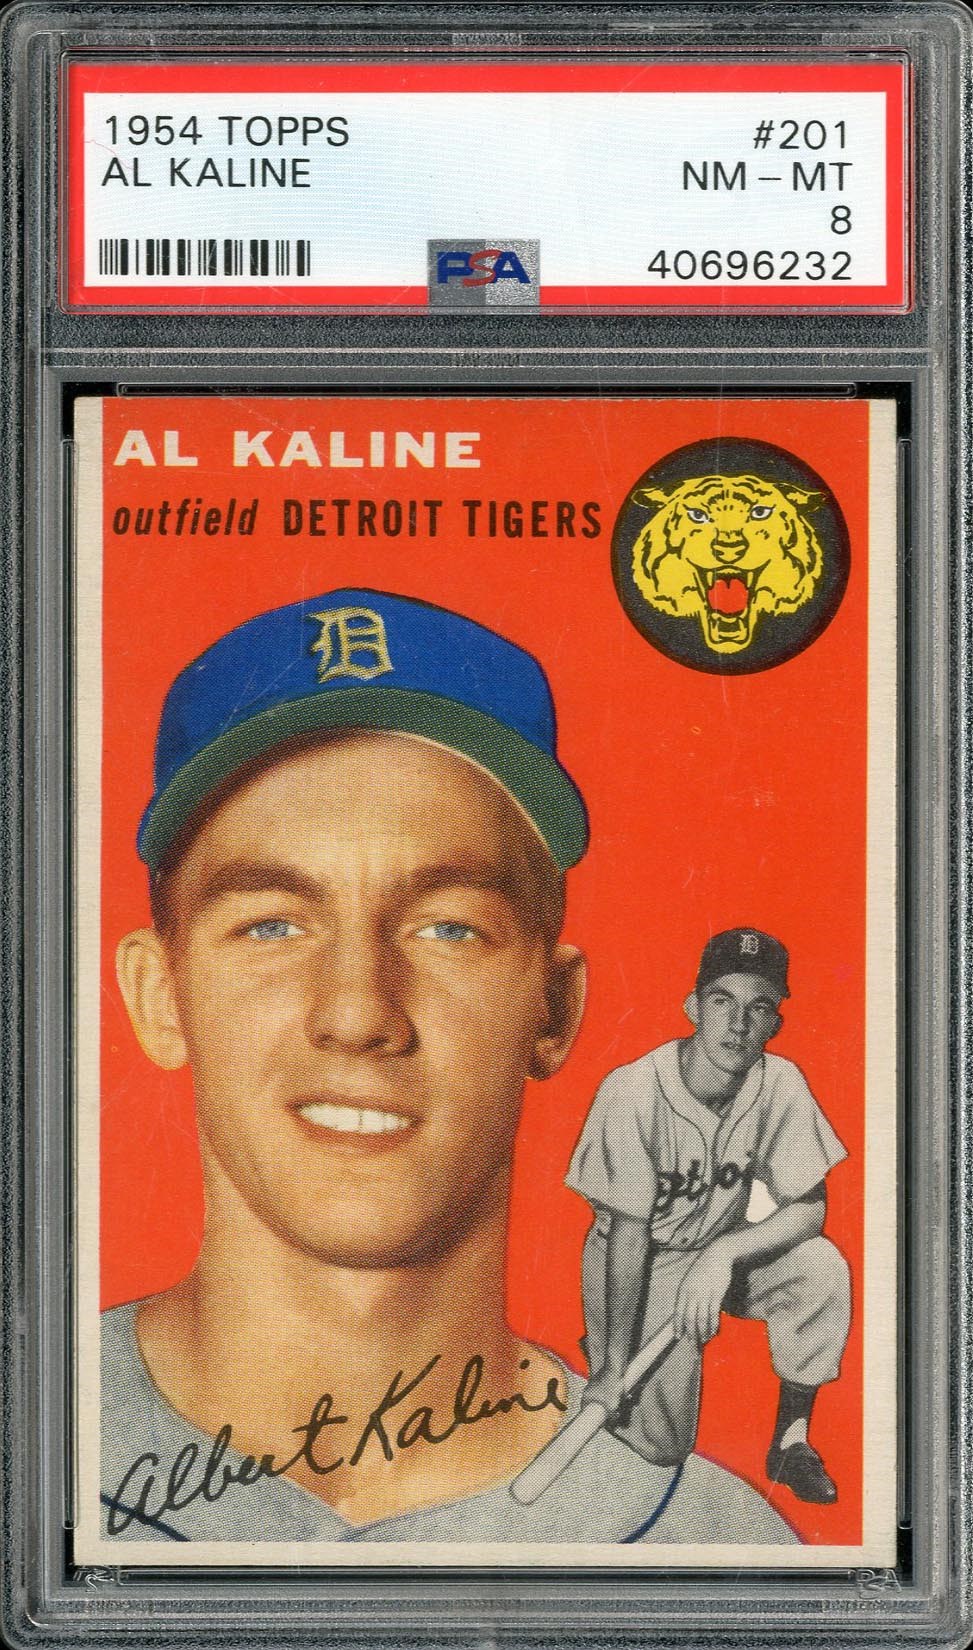 Baseball and Trading Cards - 1954 Topps #201 Al Kaline Rookie Card - PSA NM-MT 8